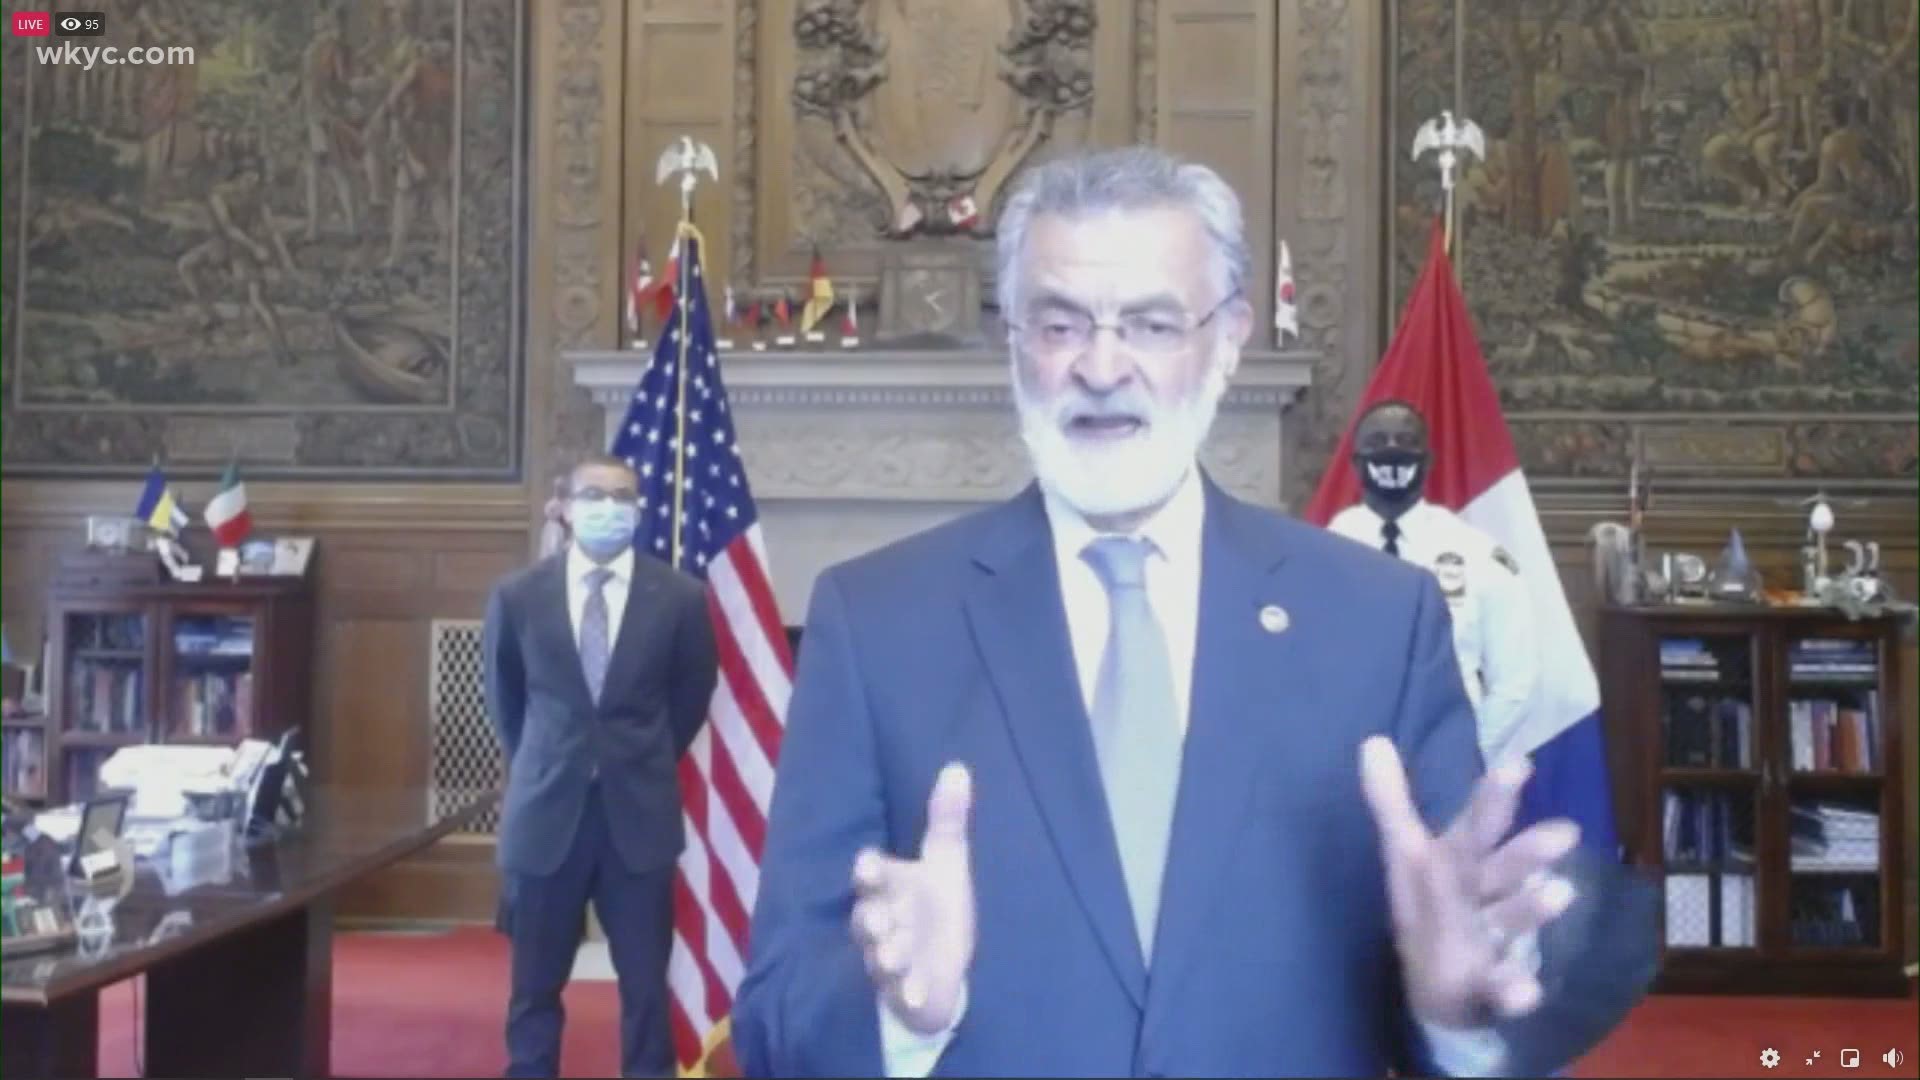 Mayor Jackson noted that there have already been 47 homicides in Cleveland this year. That is 12 more than what the city saw this time in 2020.